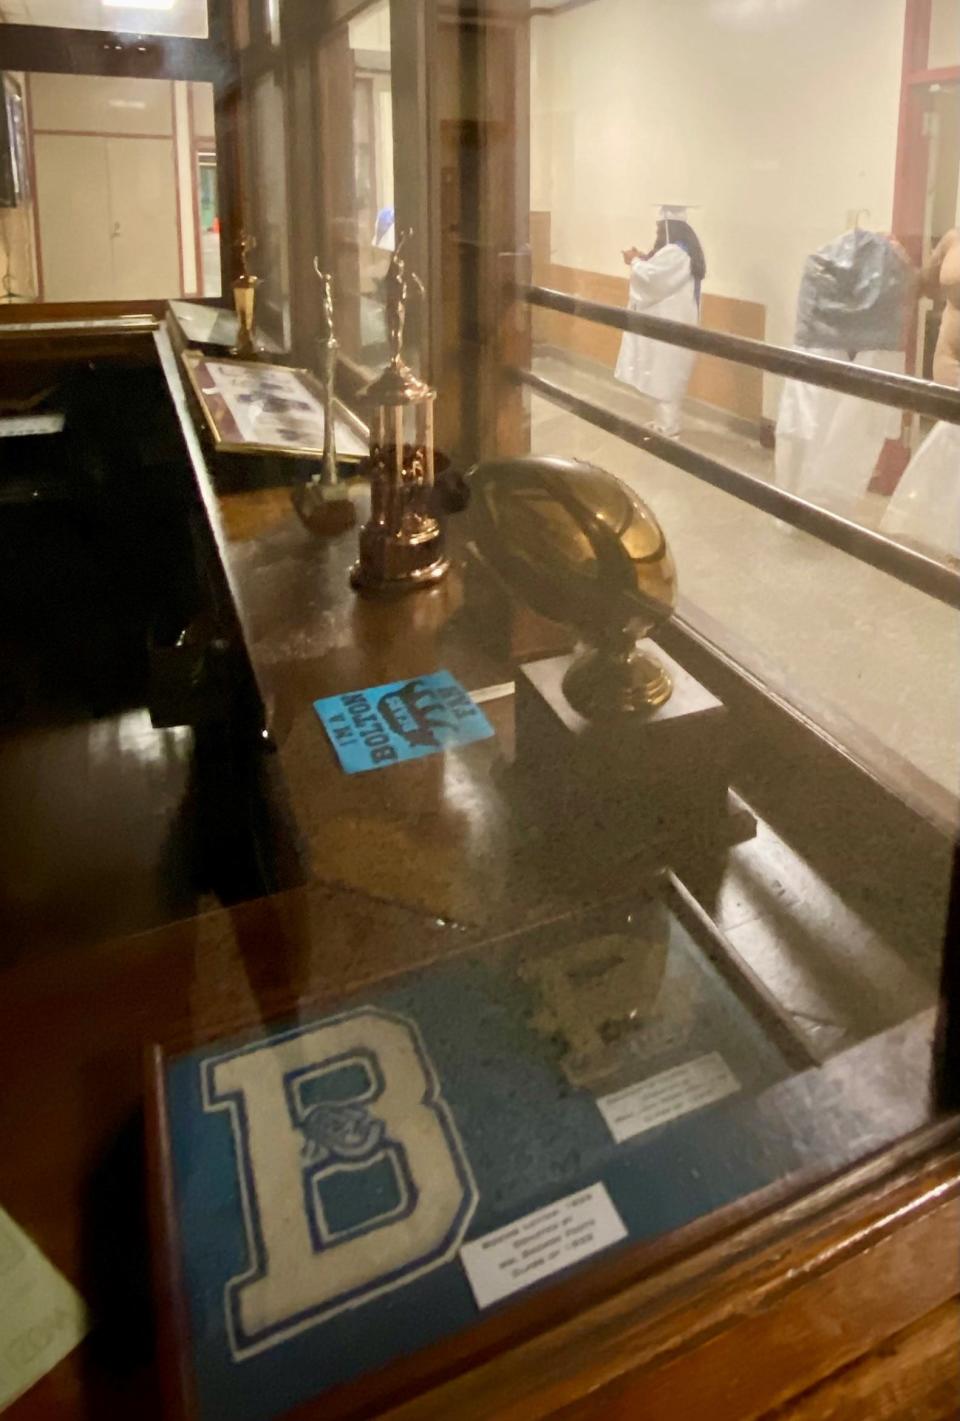 Celie Hillman can be seen looking at her phone through a display case of Bolton High School honors from years past. Hillman is among the last class of Bolton graduates before the school transforms into an academic and performing arts magnet.